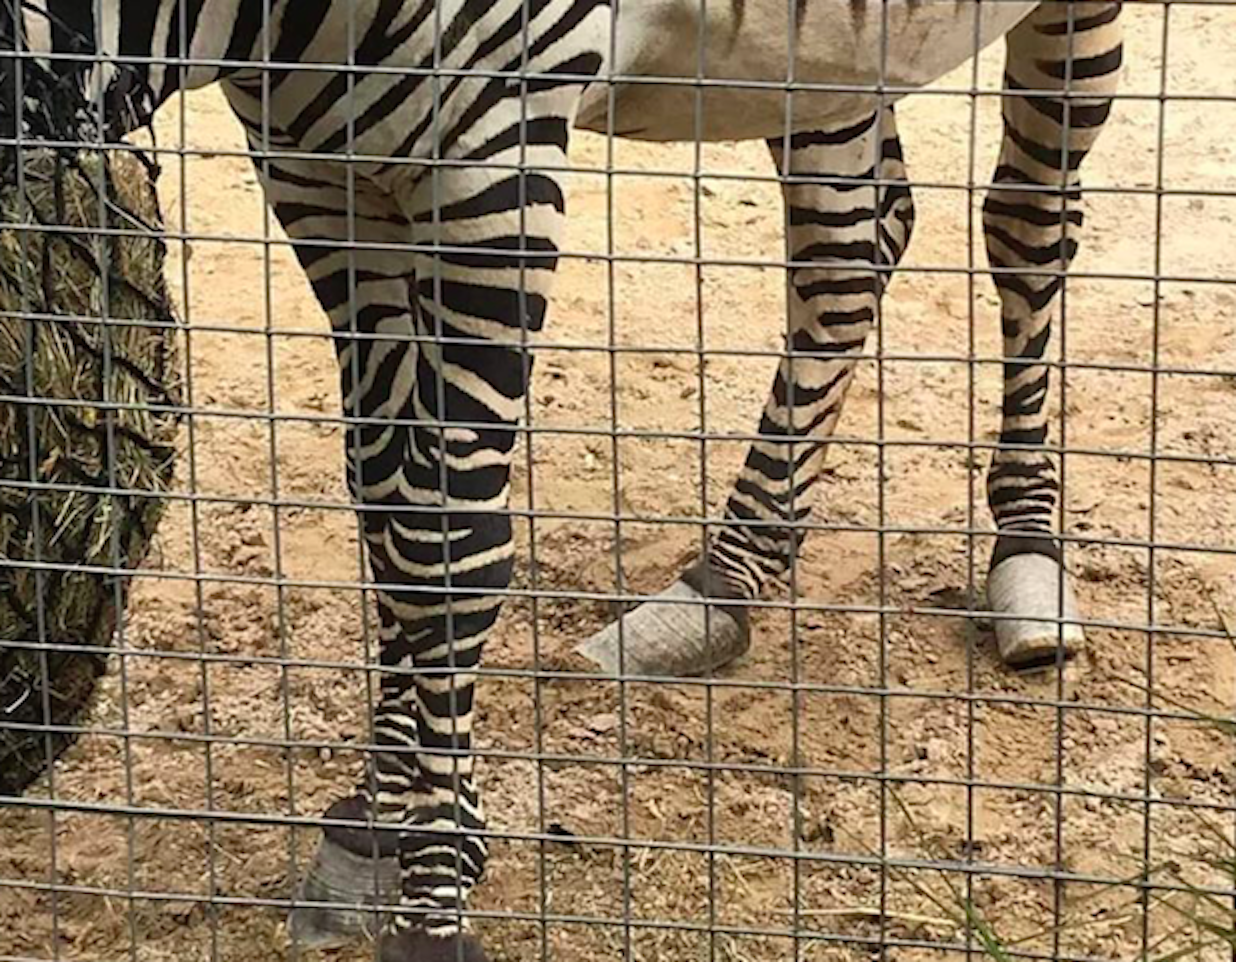 Urias the zebra's hooves were slanted (Picture: Heather Moffett/Facebook)